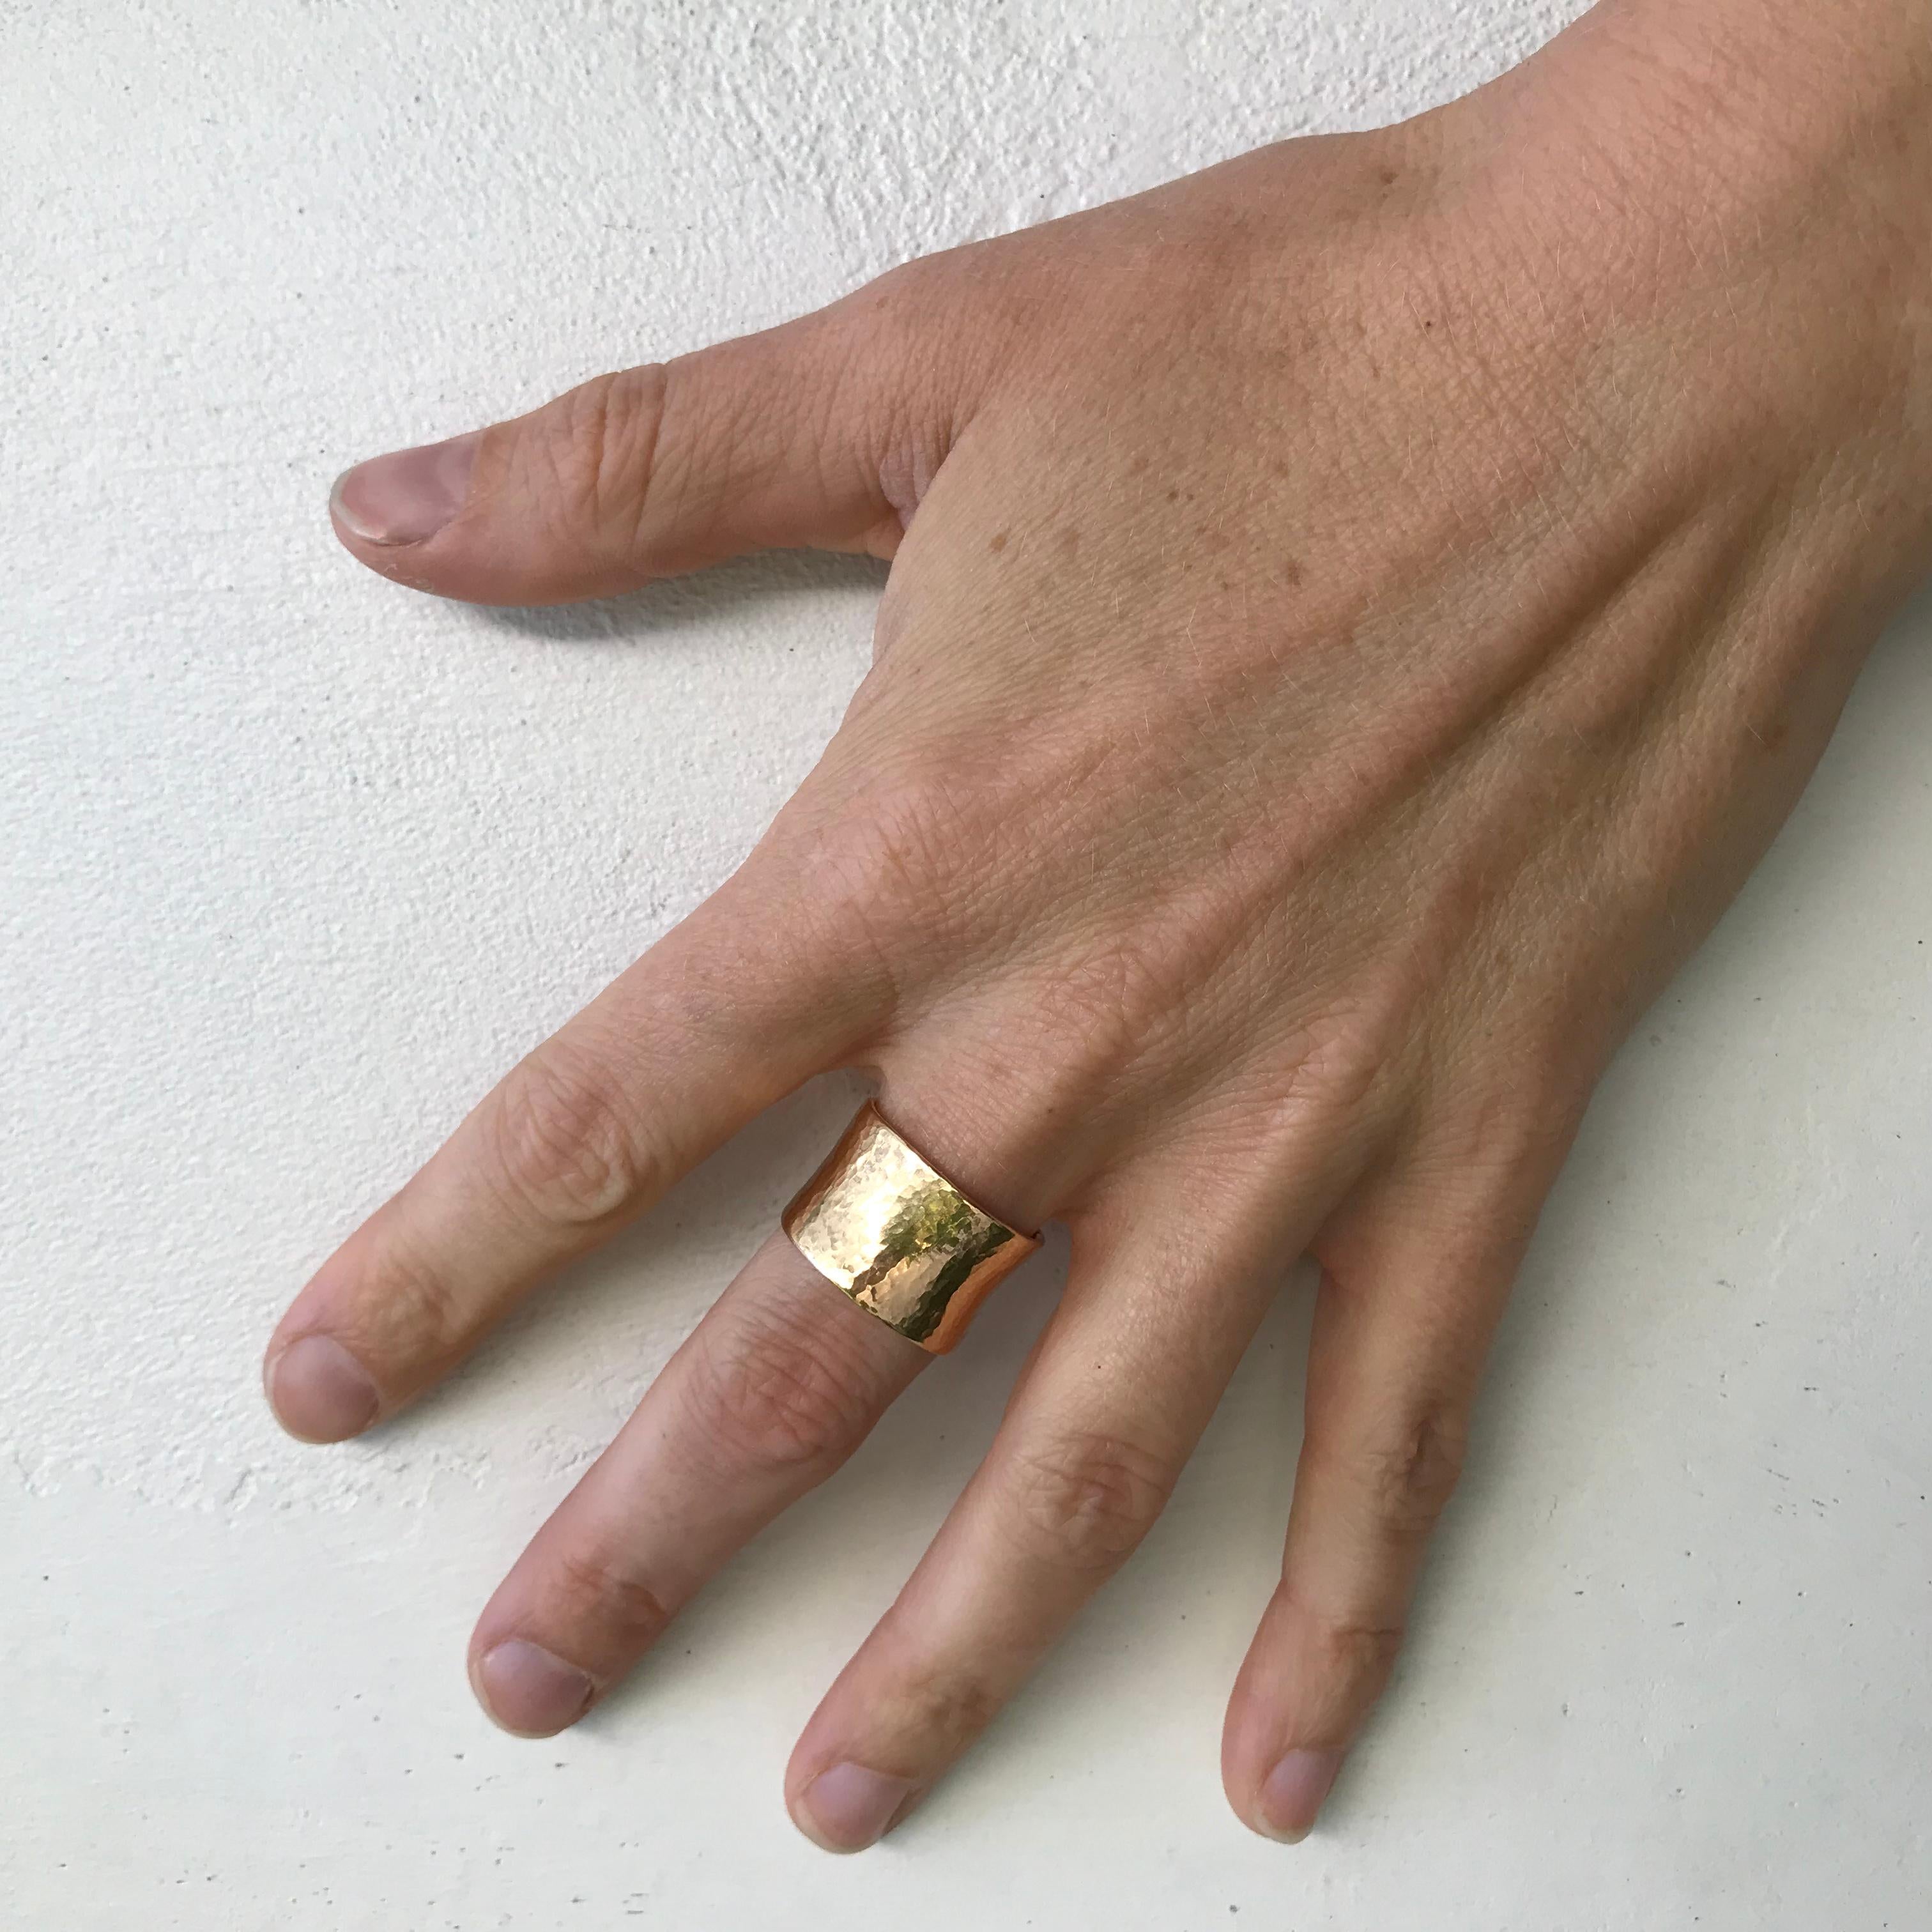 Classic 18 carat hammered rose gold Ring designed by Colleen B. Rosenblat. The ring size is EU 57 and US 8.